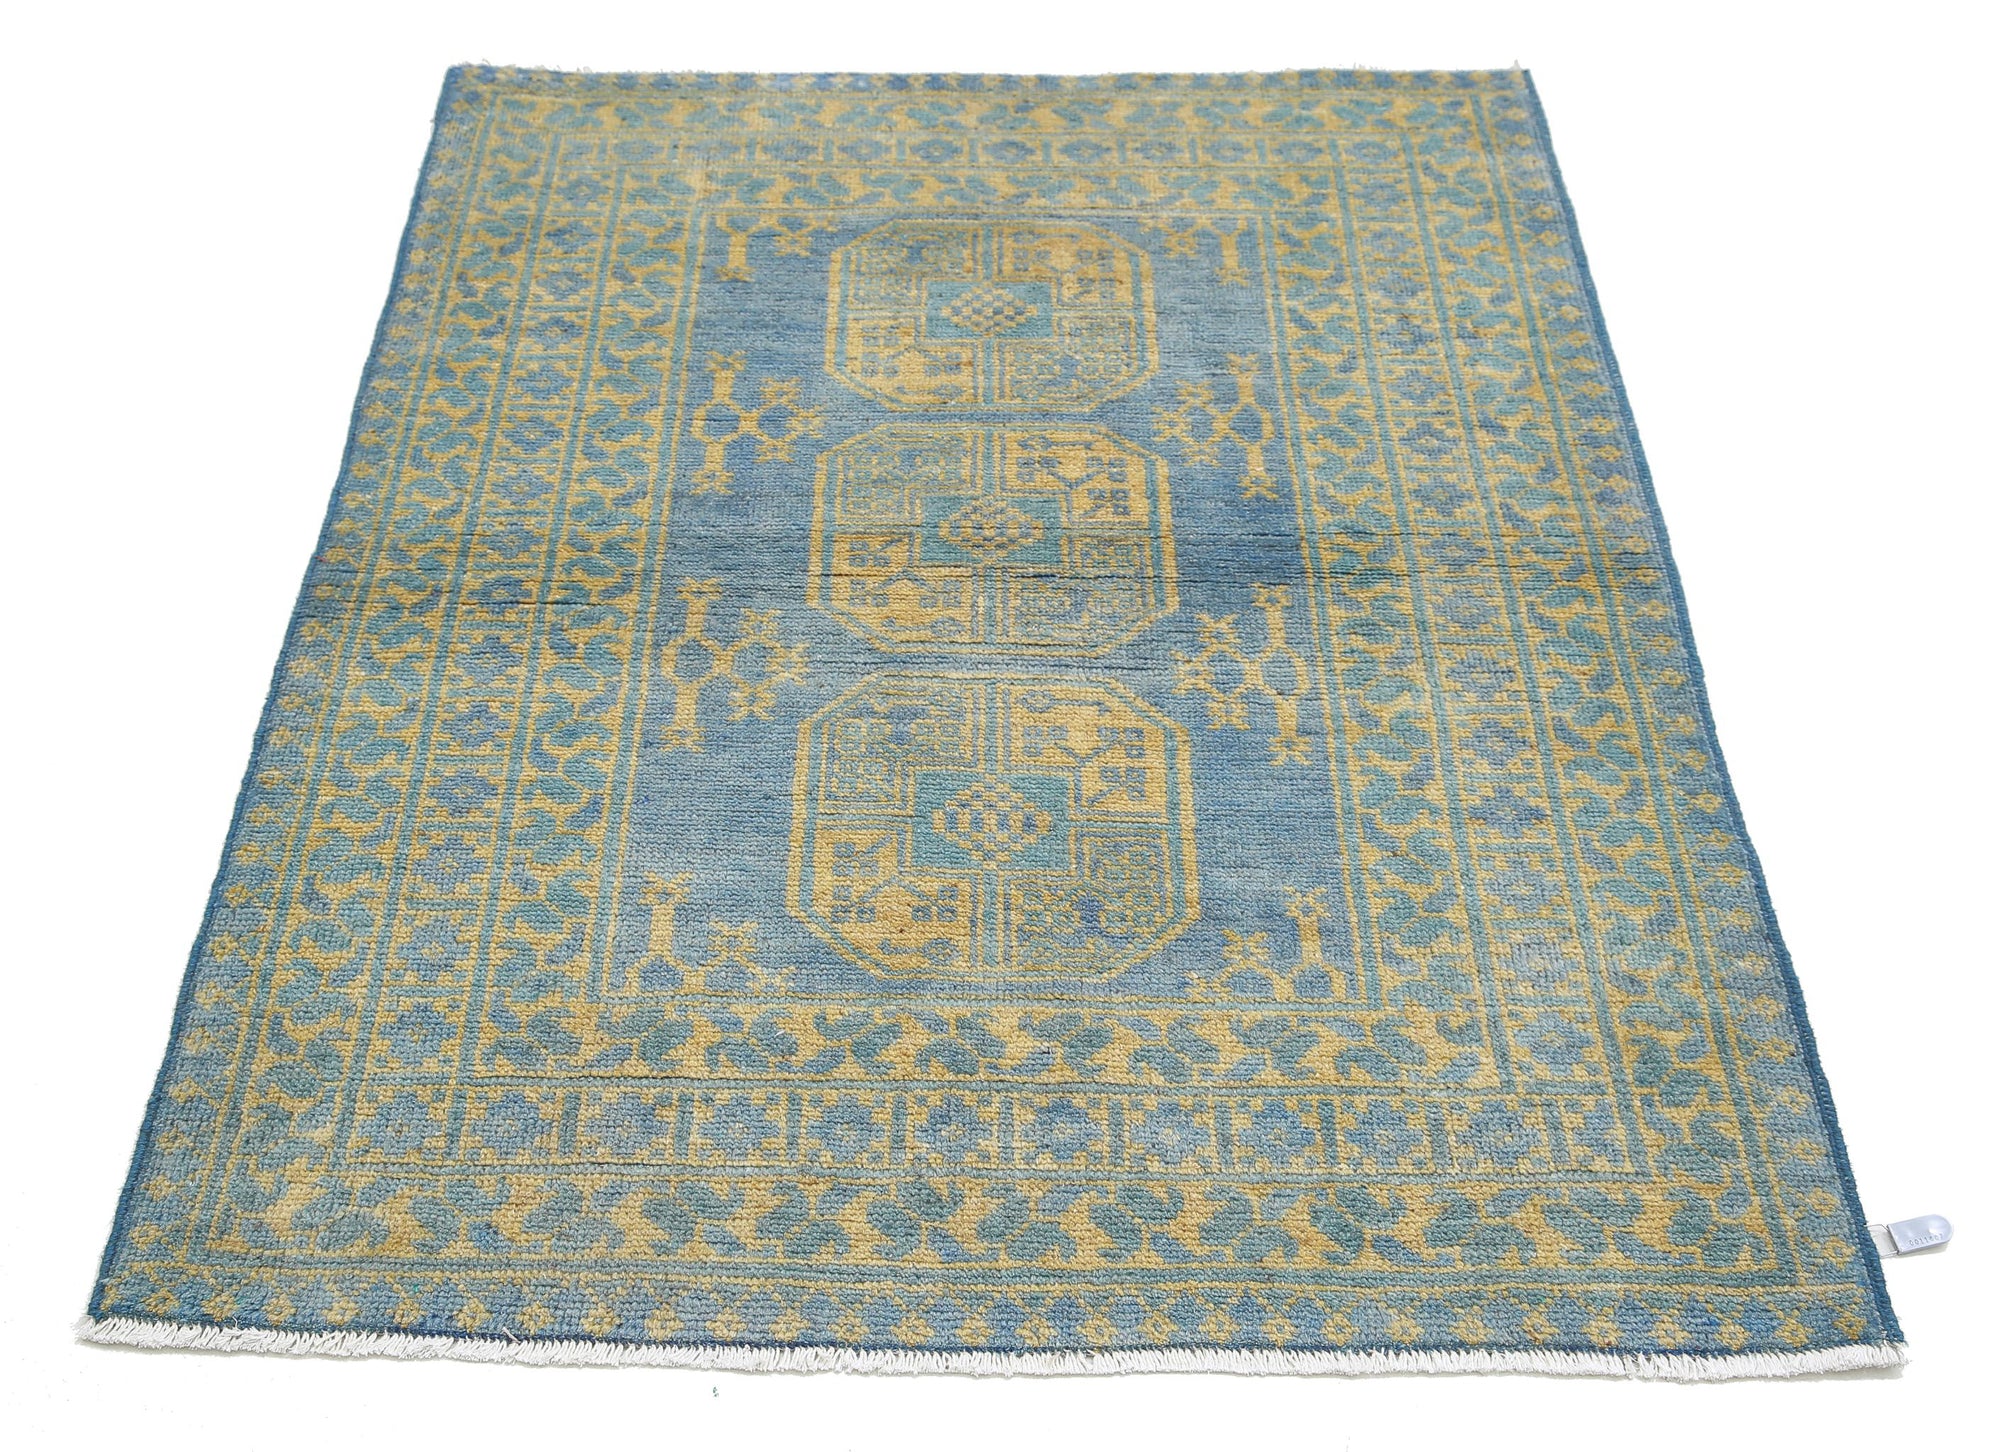 Revival-hand-knotted-gul-collection-wool-rug-5013911-3.jpg